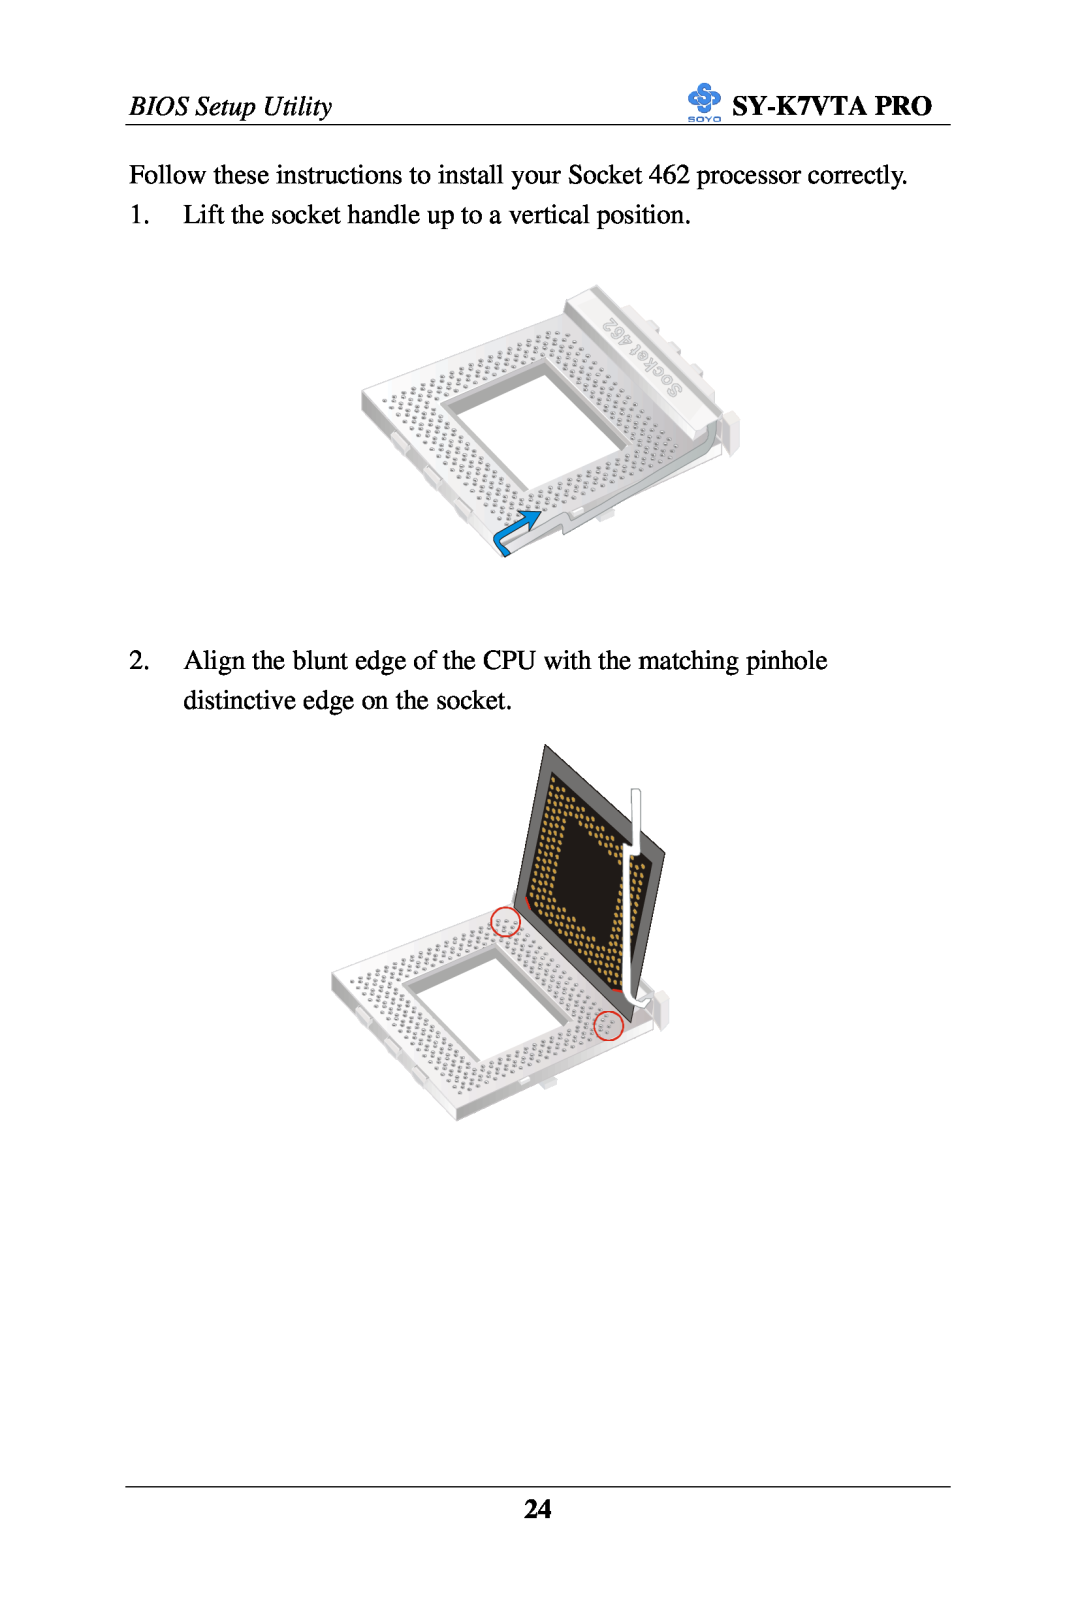 SOYO SY-K7VTA PRO user manual BIOS Setup Utility, Lift the socket handle up to a vertical position 